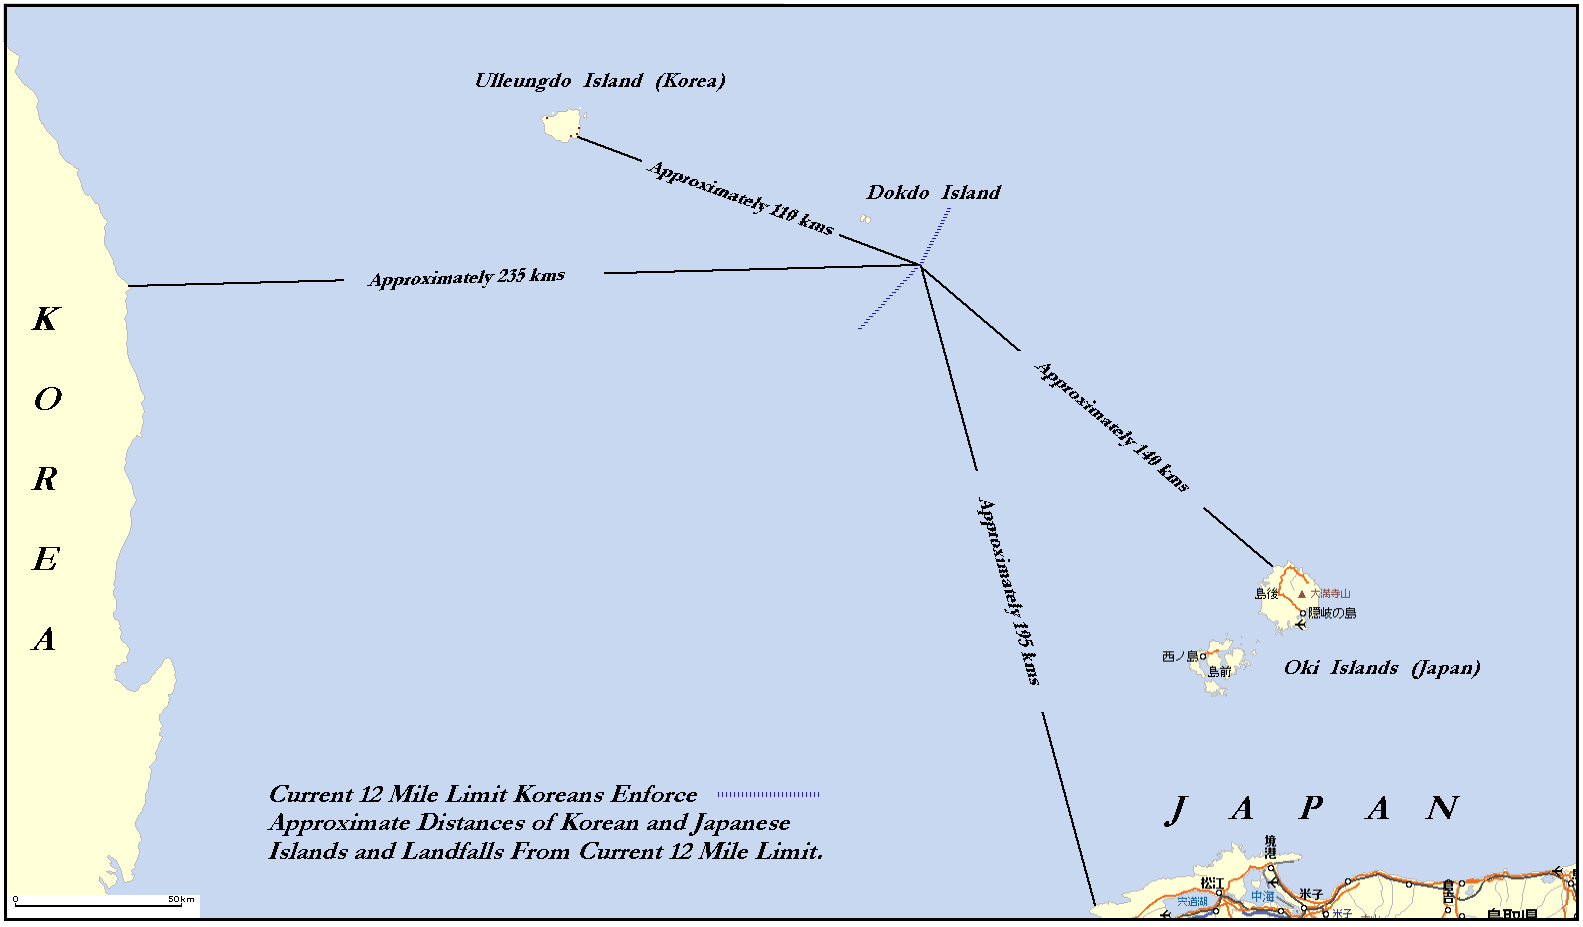 A map showing current boundary between Korea and Japan たけしま 竹島 liancourt rocks